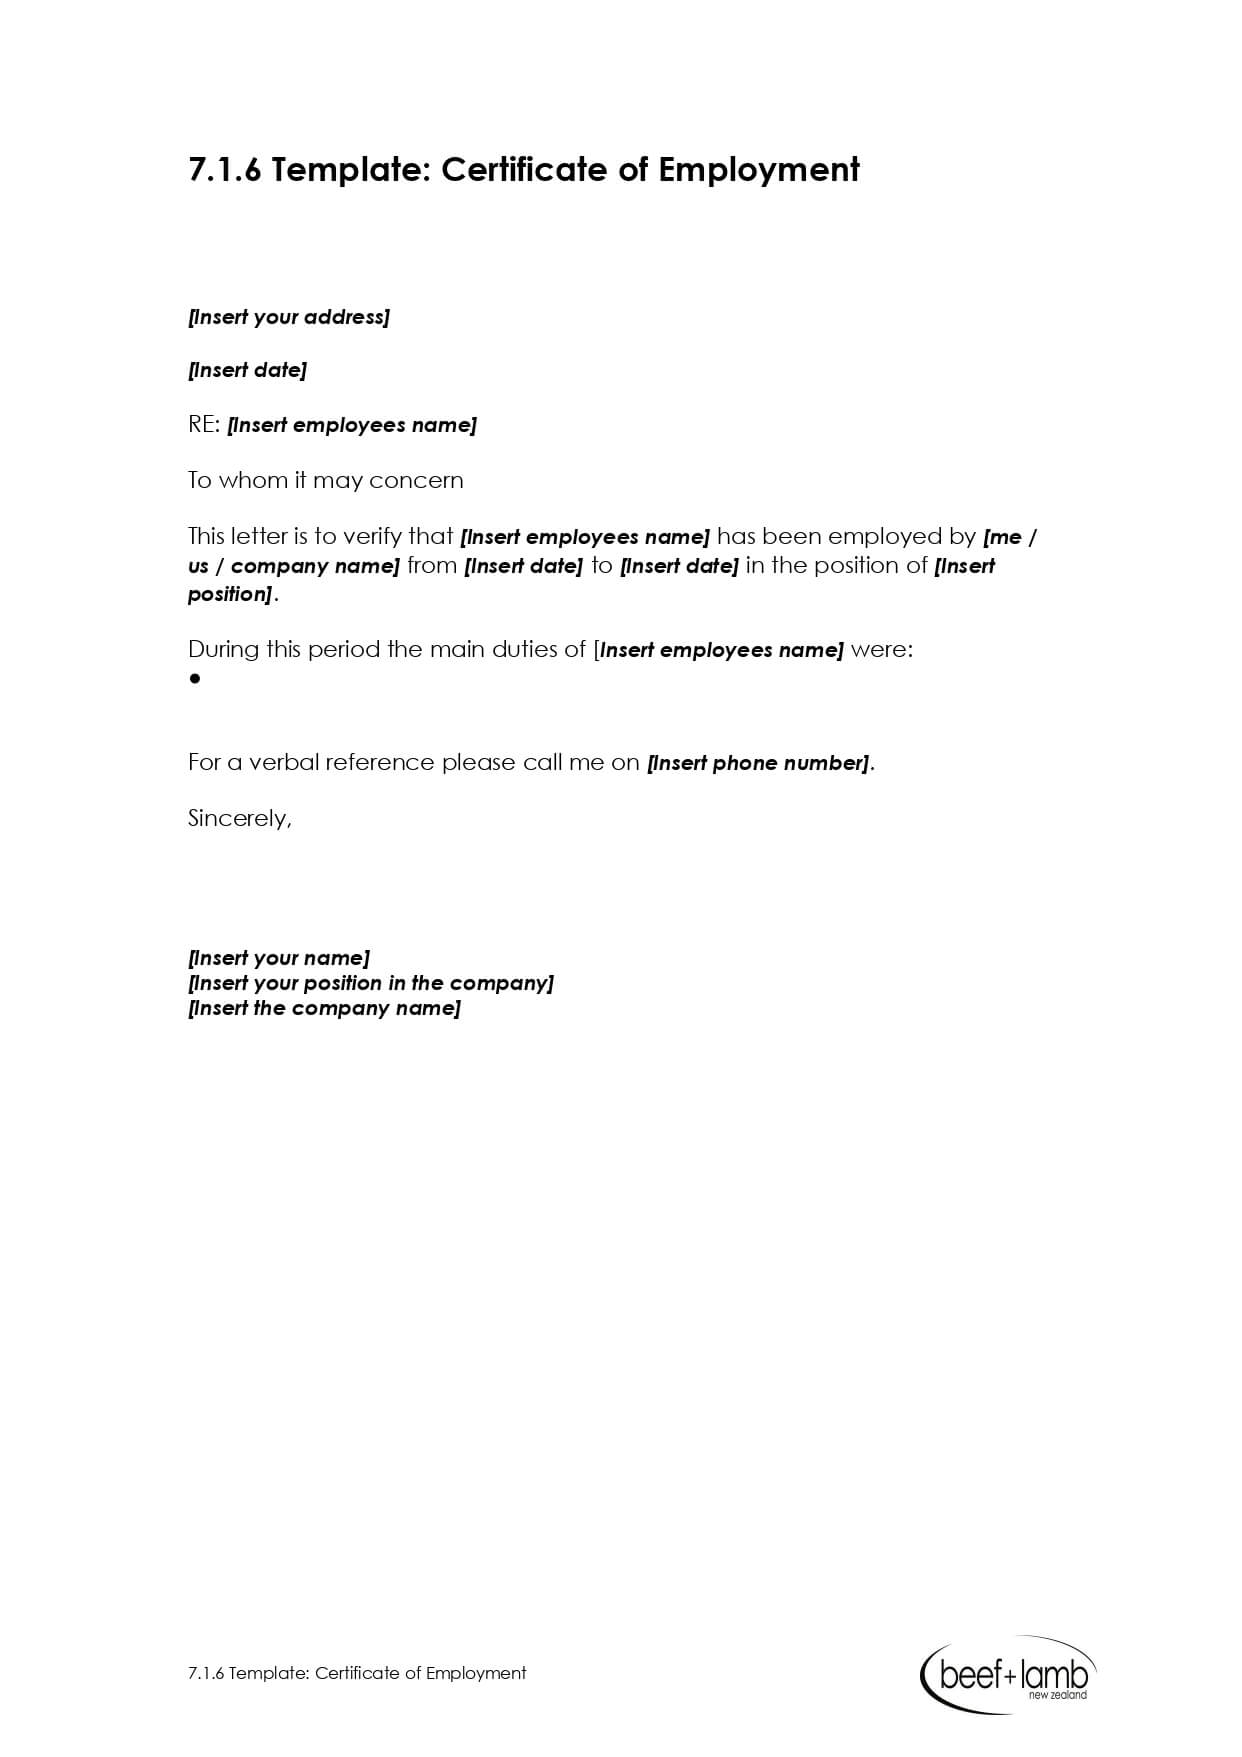 Editable Certificate Of Employment Template – Google Docs Regarding Certificate Of Employment Template